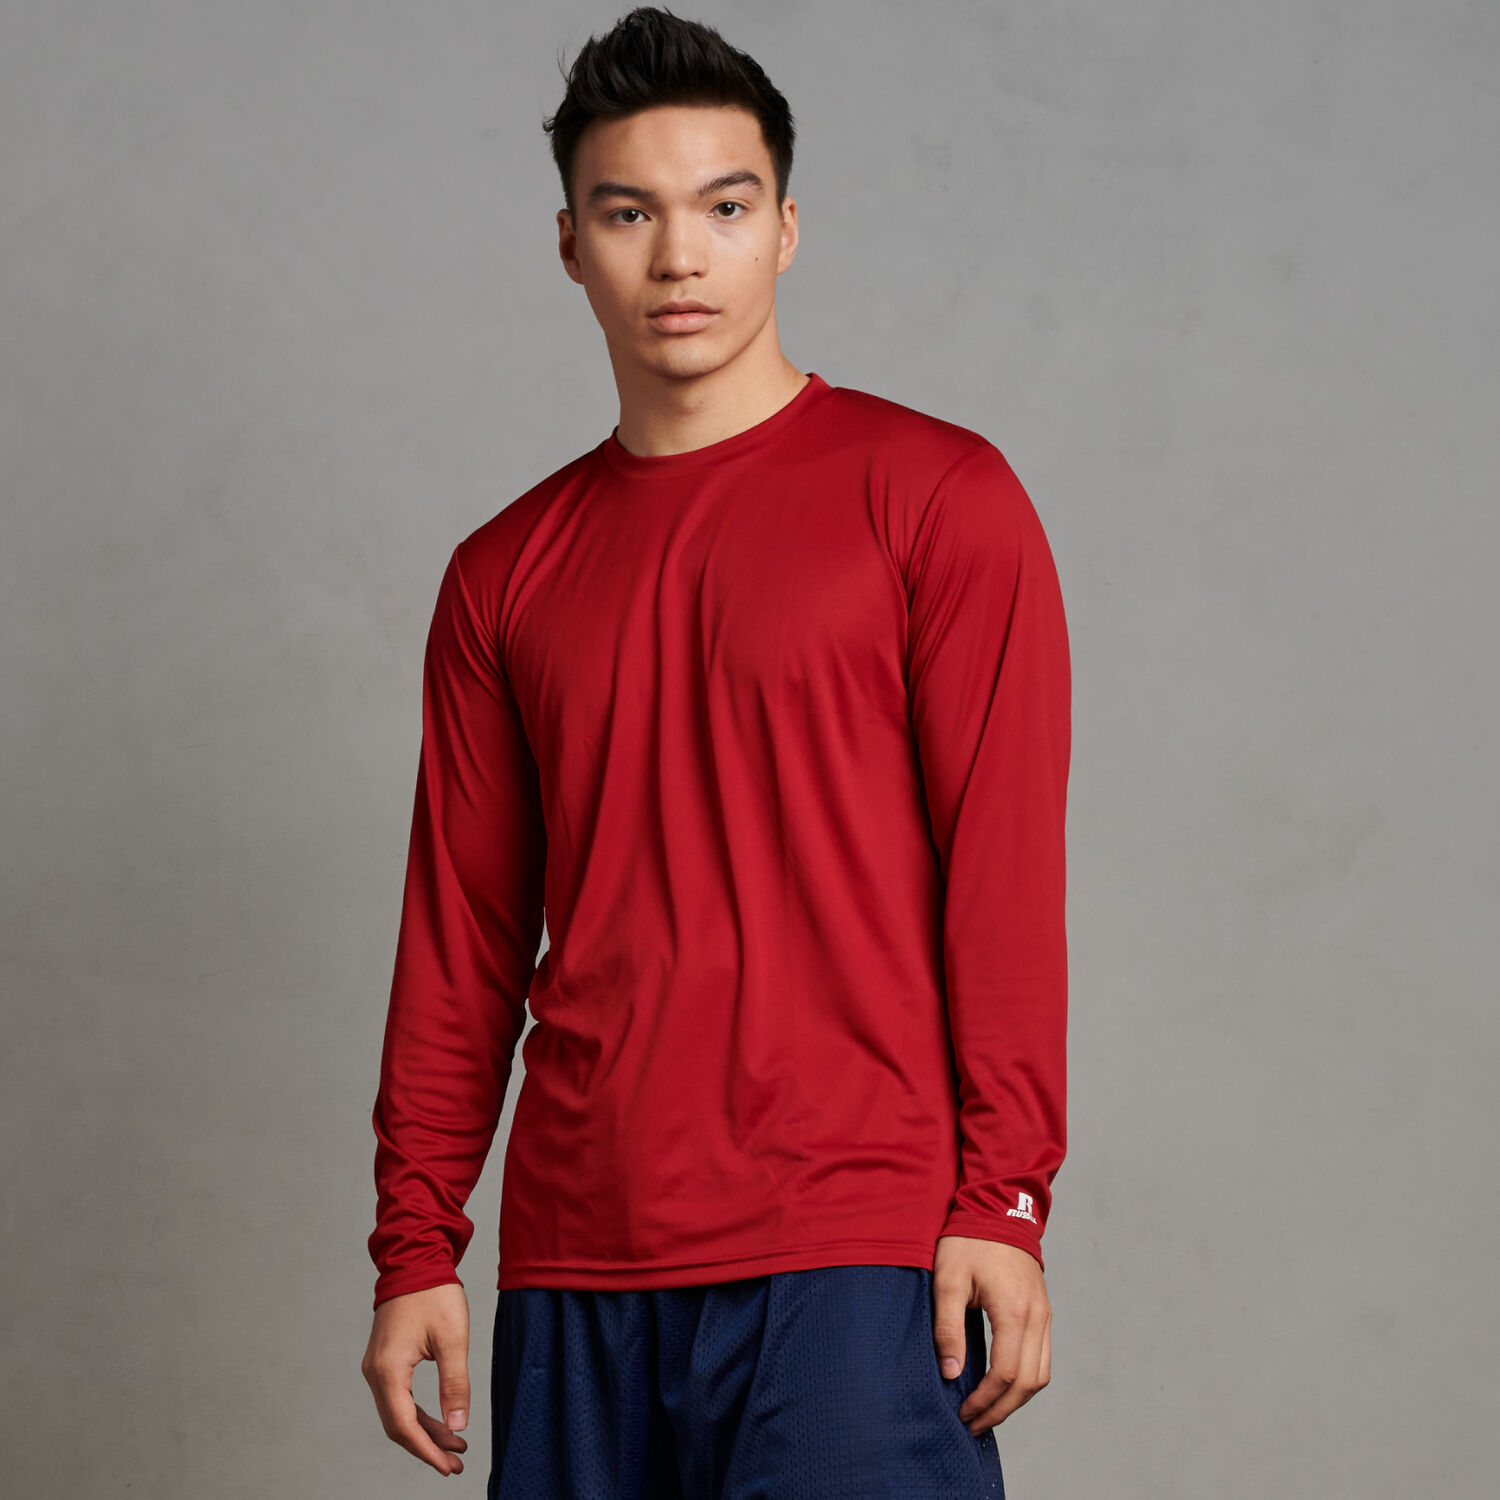 Russell Athletic 631X2M Core Long Sleeve Performance Tee - True Red - M